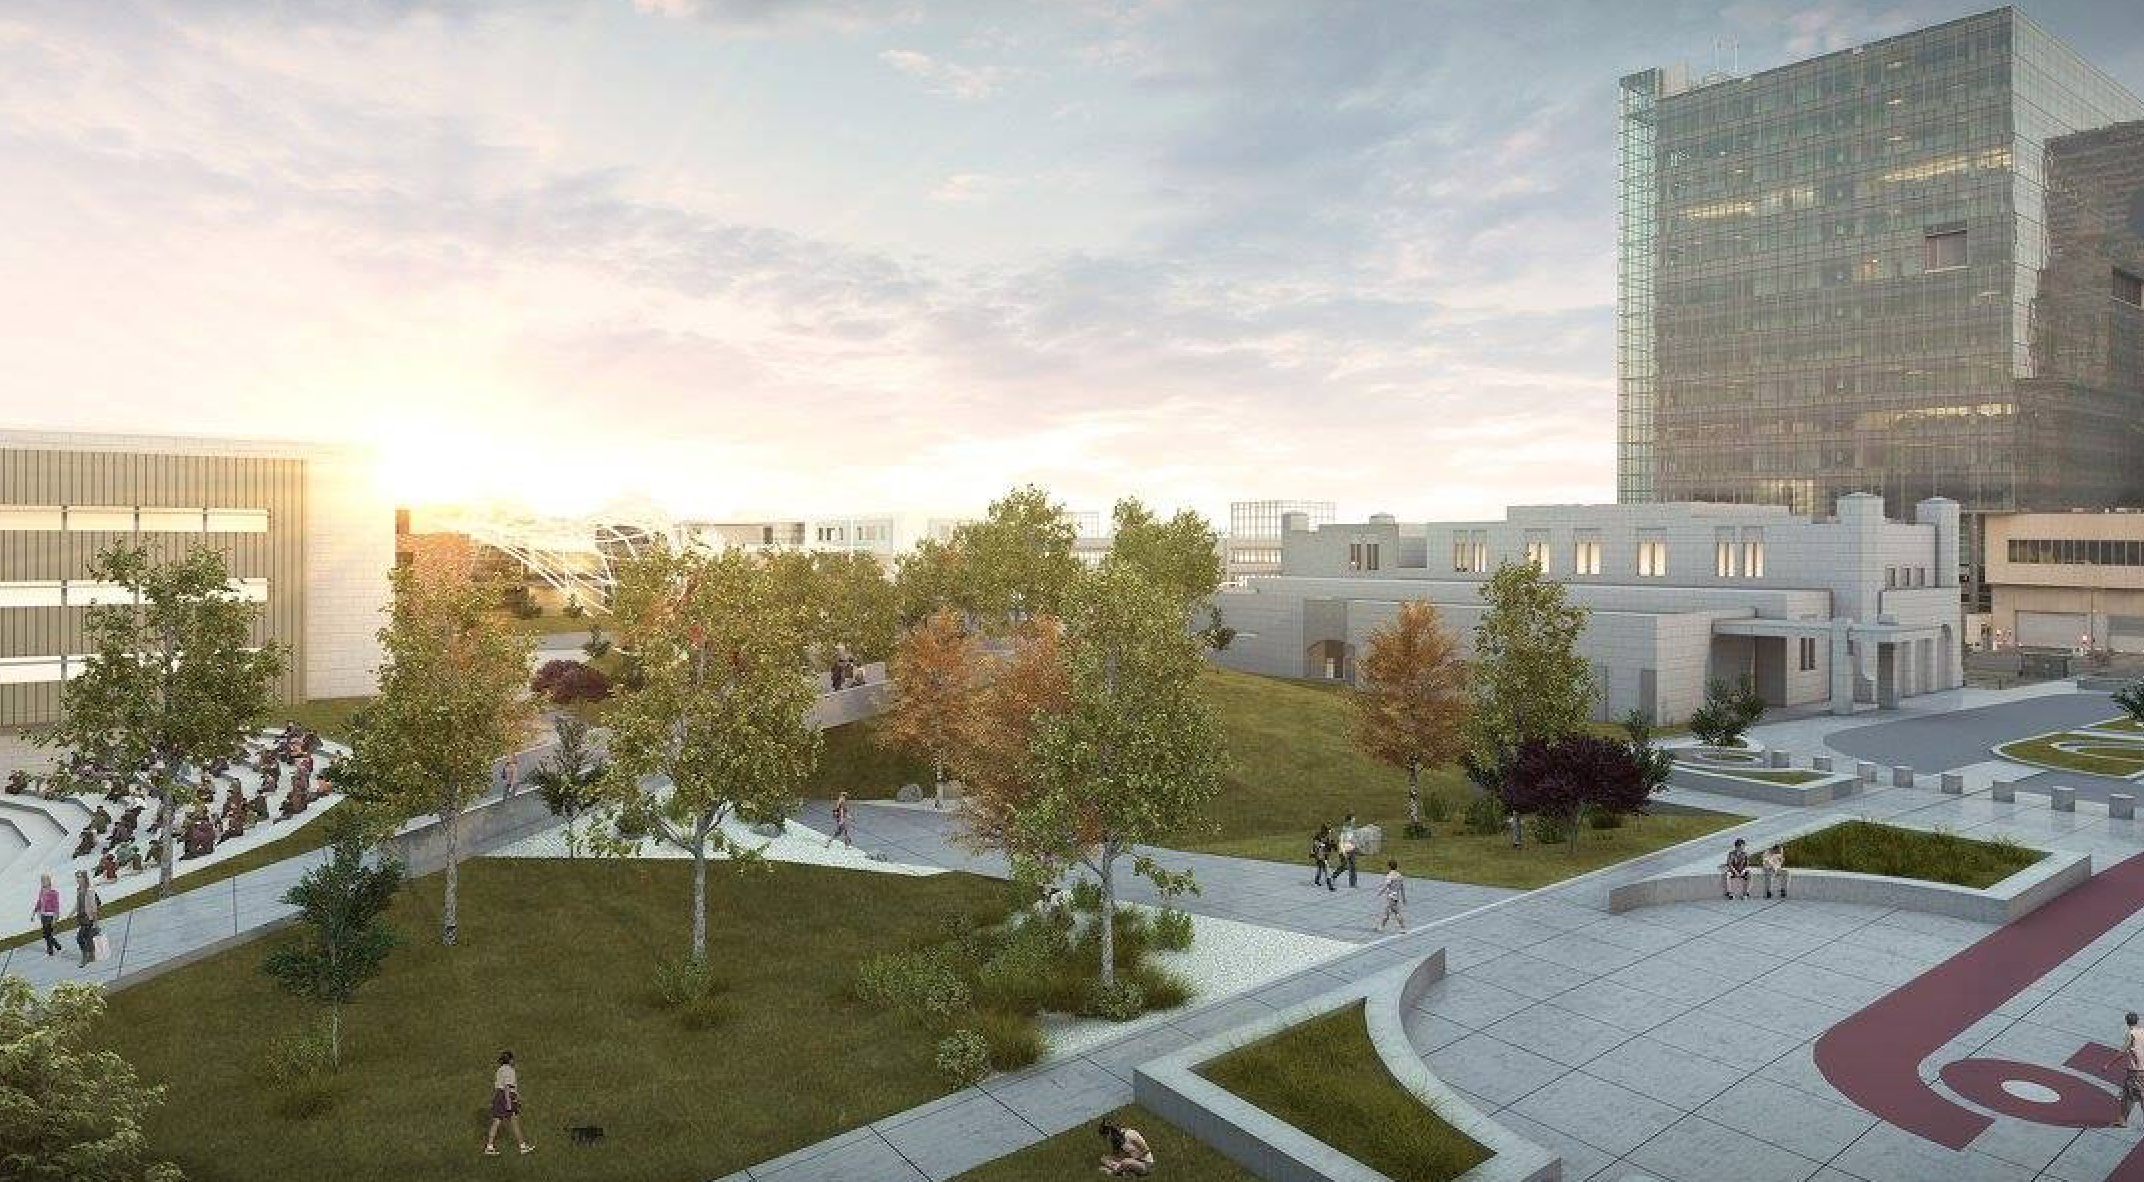 This conceptual rendering shows raised park space near the Union Depot building downtown as envisioned as part of City Councilor Blake Ewing's downtown transit hub. Rendering provided by kin slow, keith & todd, inc.